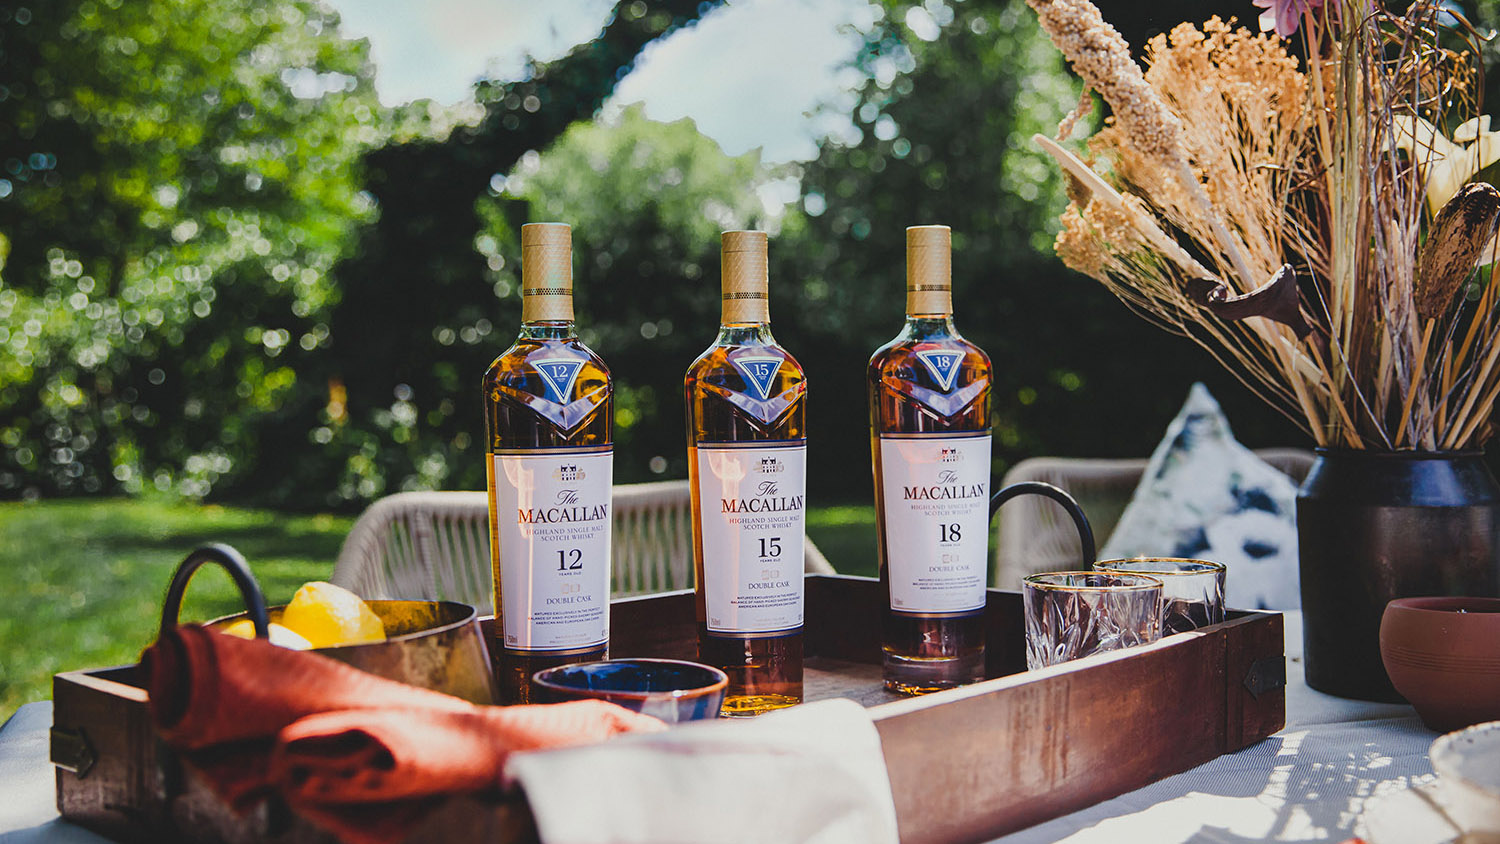 The Macallan Whisky Bench Experience